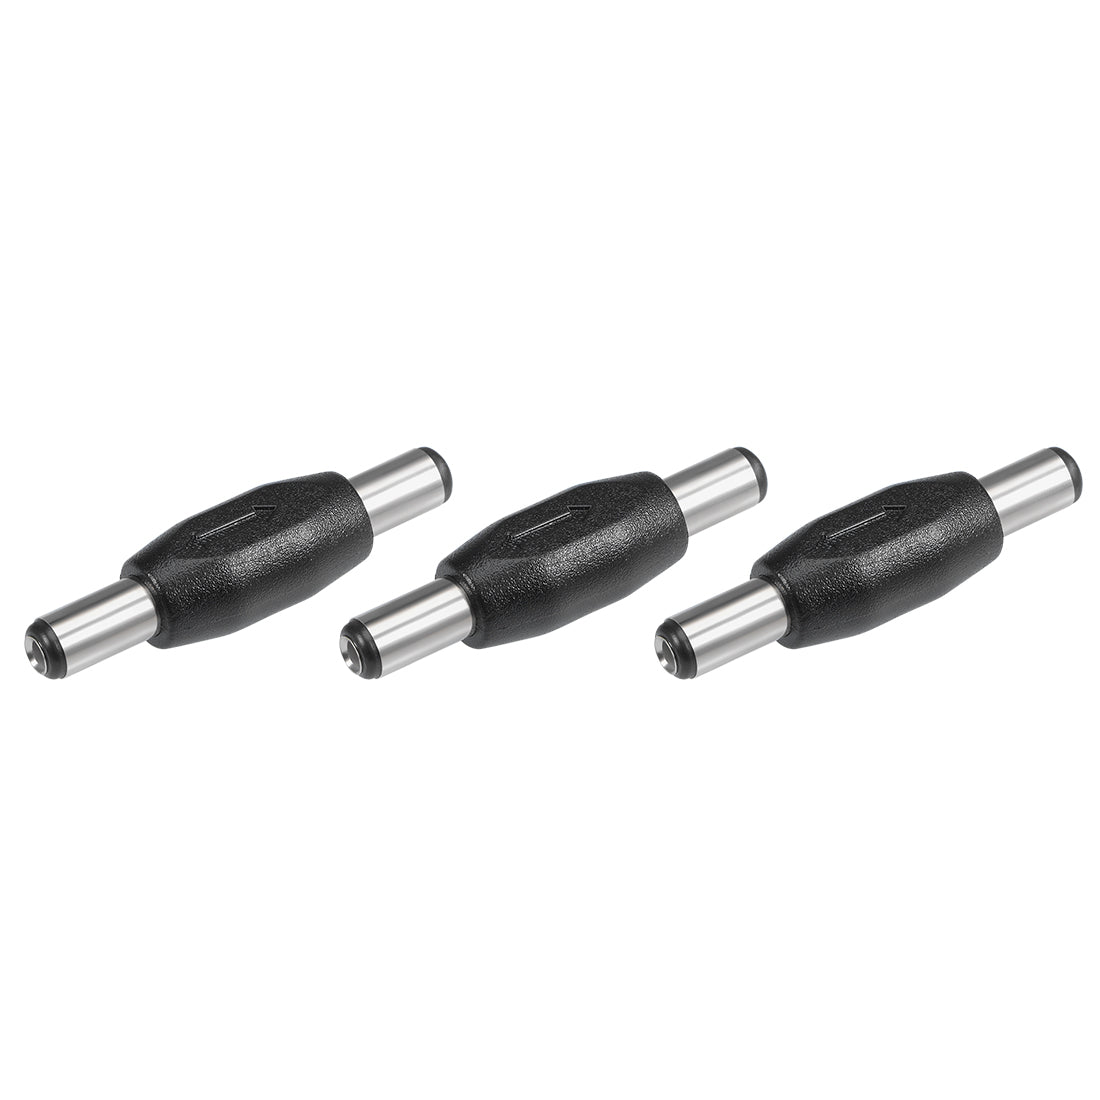 uxcell Uxcell 3Pcs DC Male to Male Connector 5.5mm x 2.1mm Power Cable Jack Adapter Black